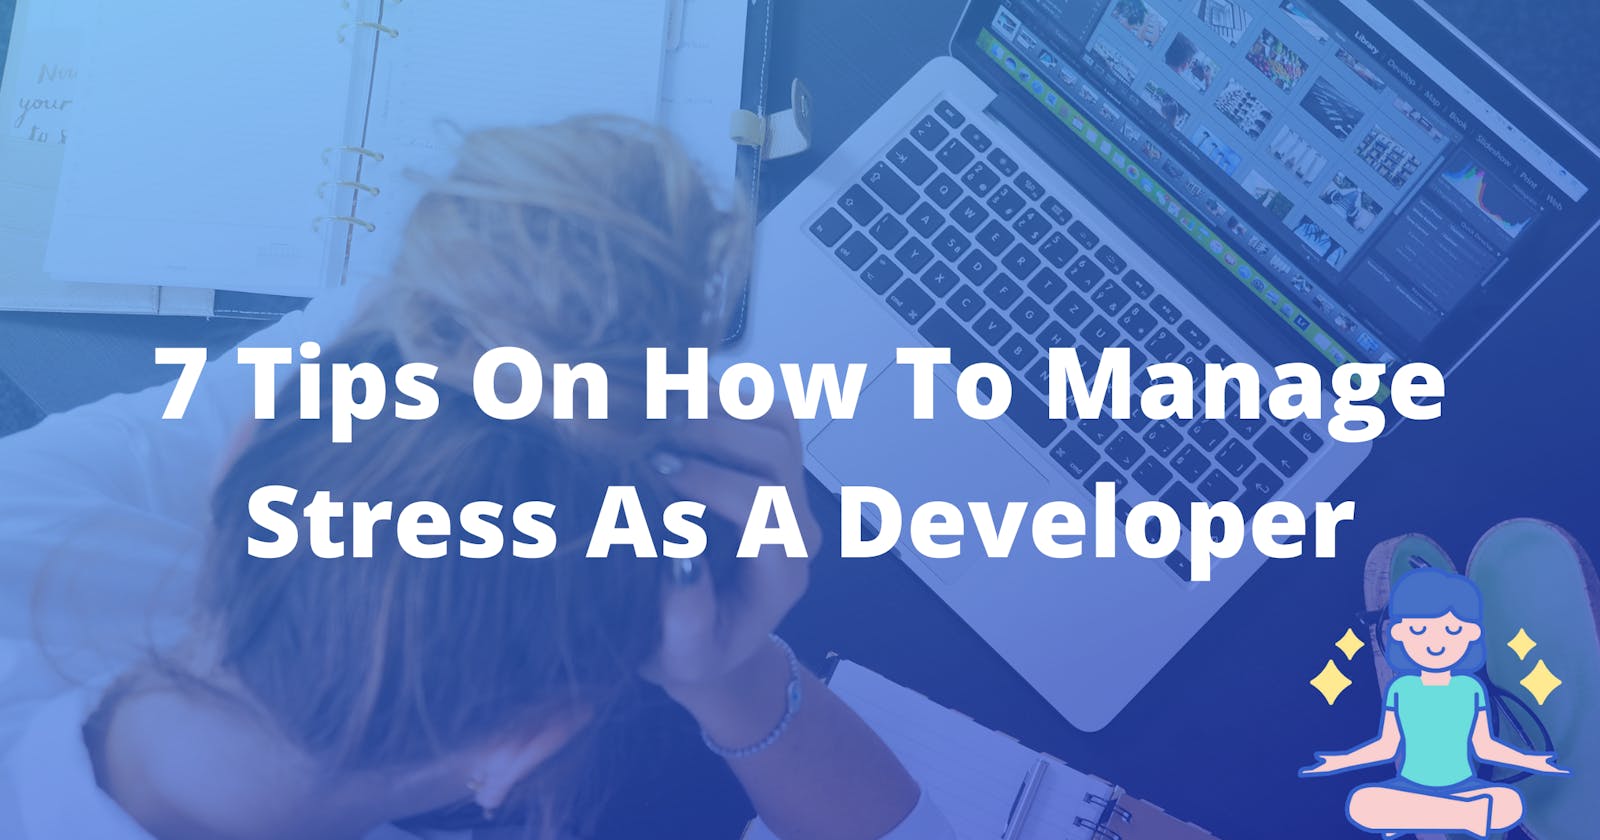 7 Tips on How to Manage Stress as a Developer